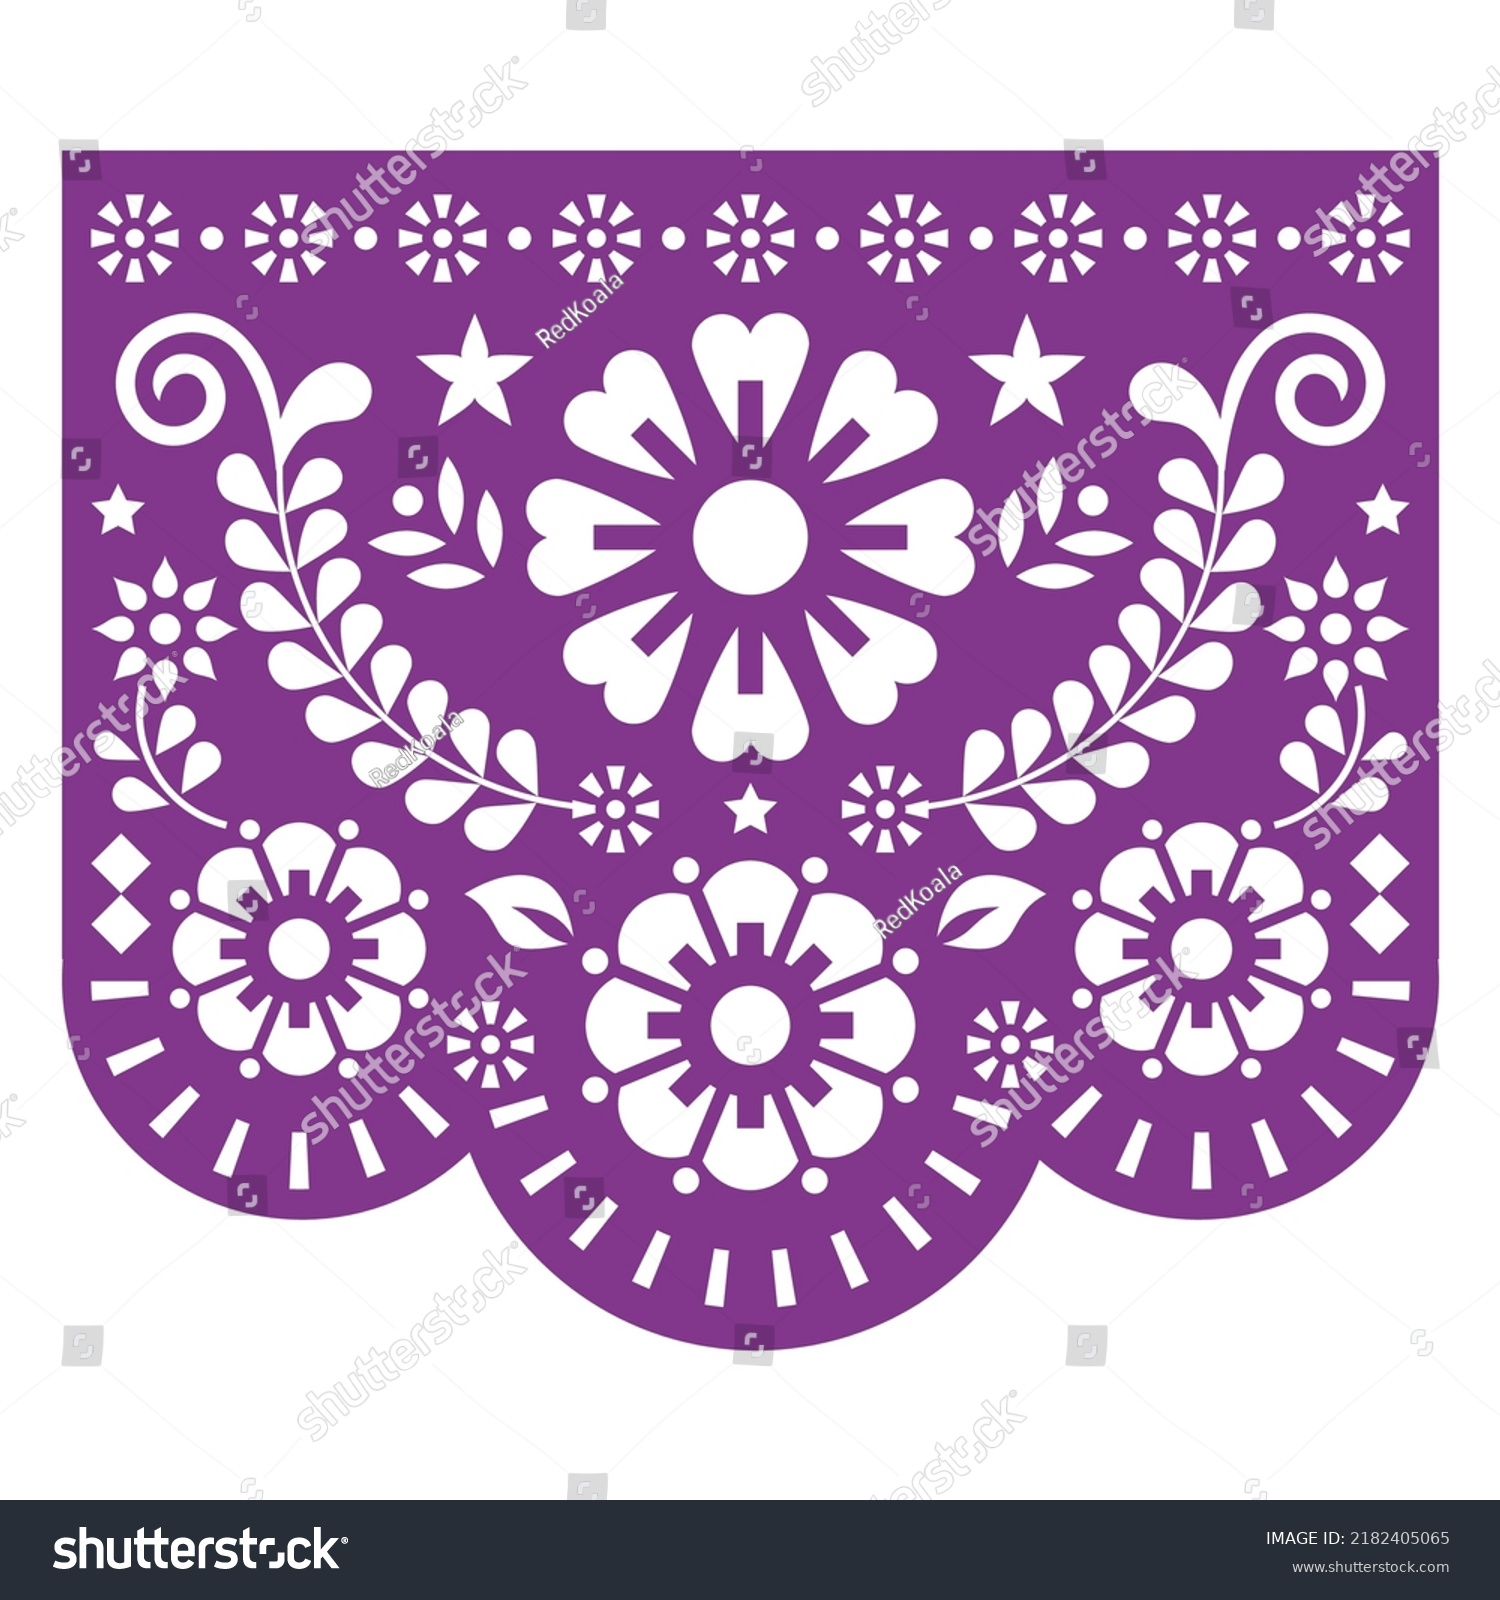 Papel Picado Vector Design Inspired By Stock Vector Royalty Free 2182405065 Shutterstock 8907